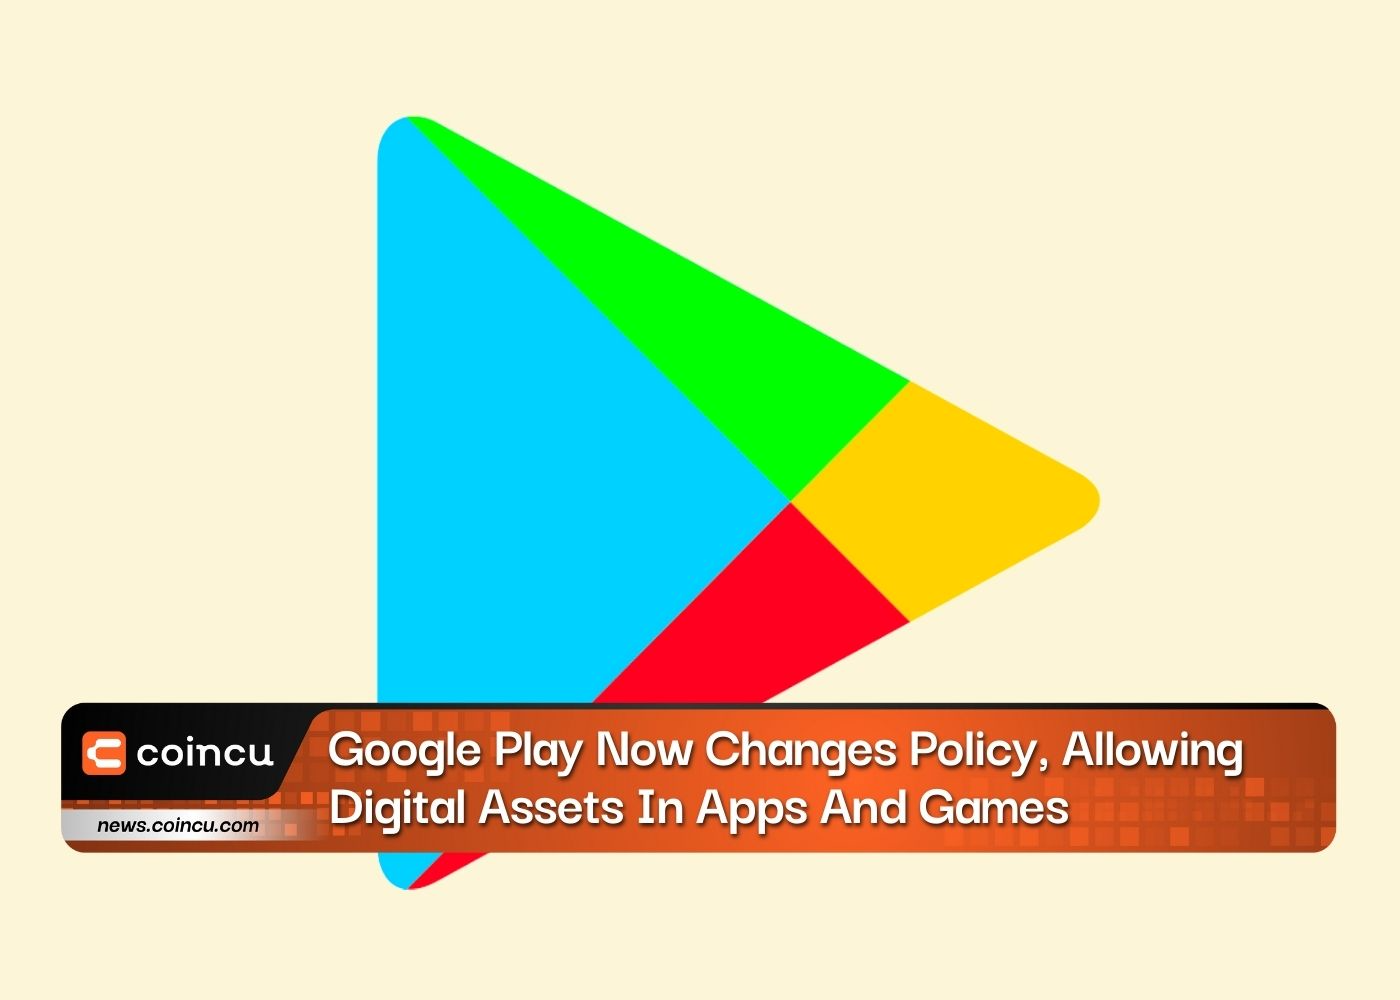 Google Play Now Changes Policy, Allowing Digital Assets In Apps And Games